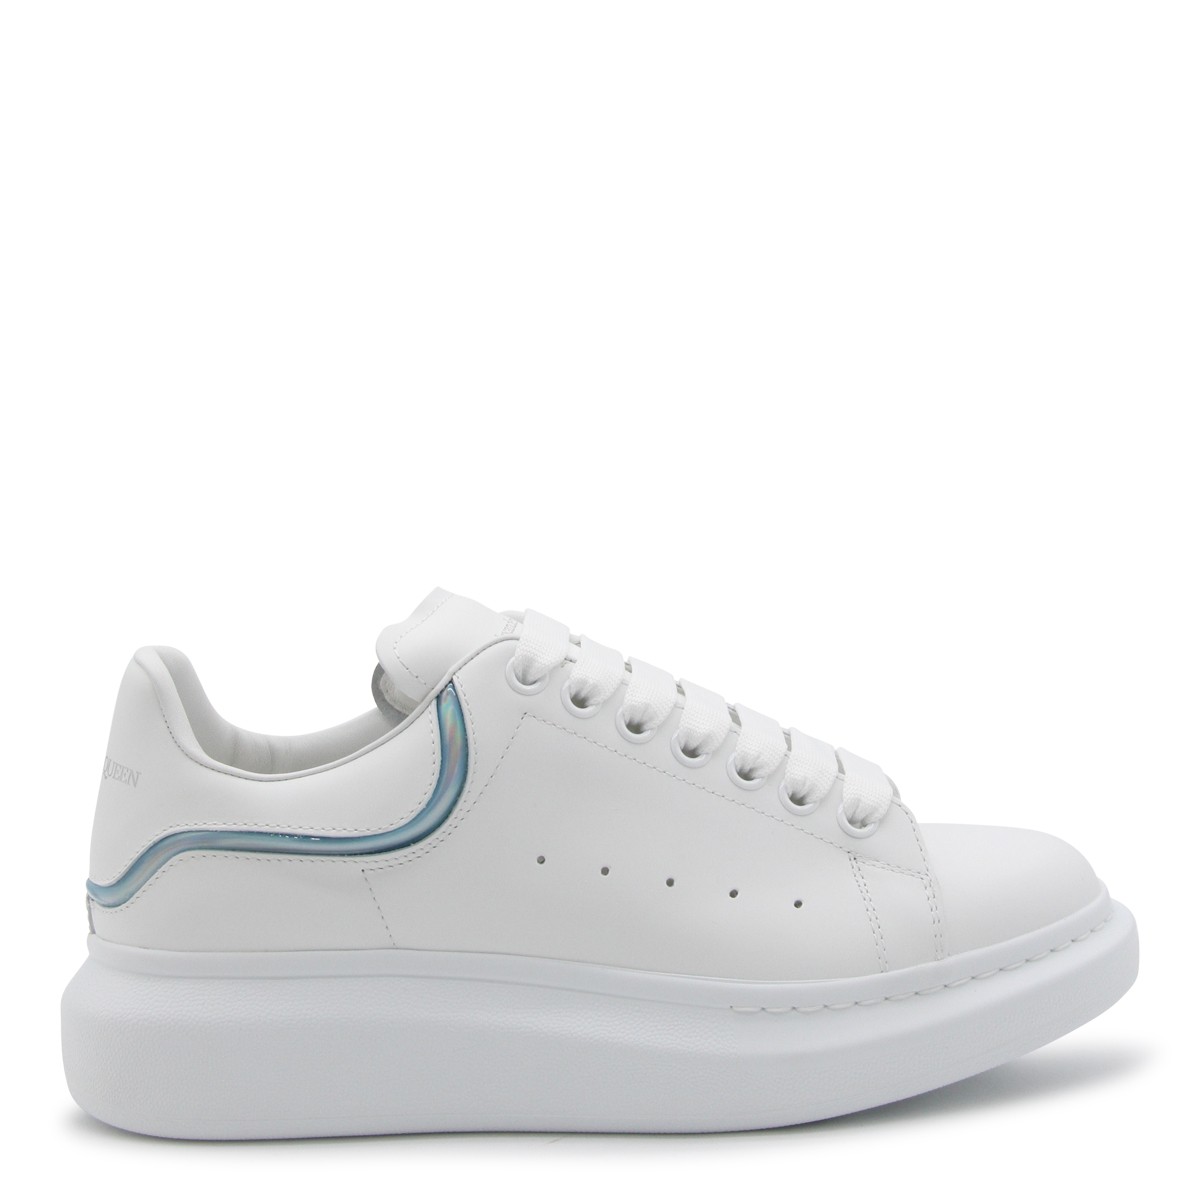 WHITE MULTICOLOUR LEATHER OVERSIZED SNEAKERS